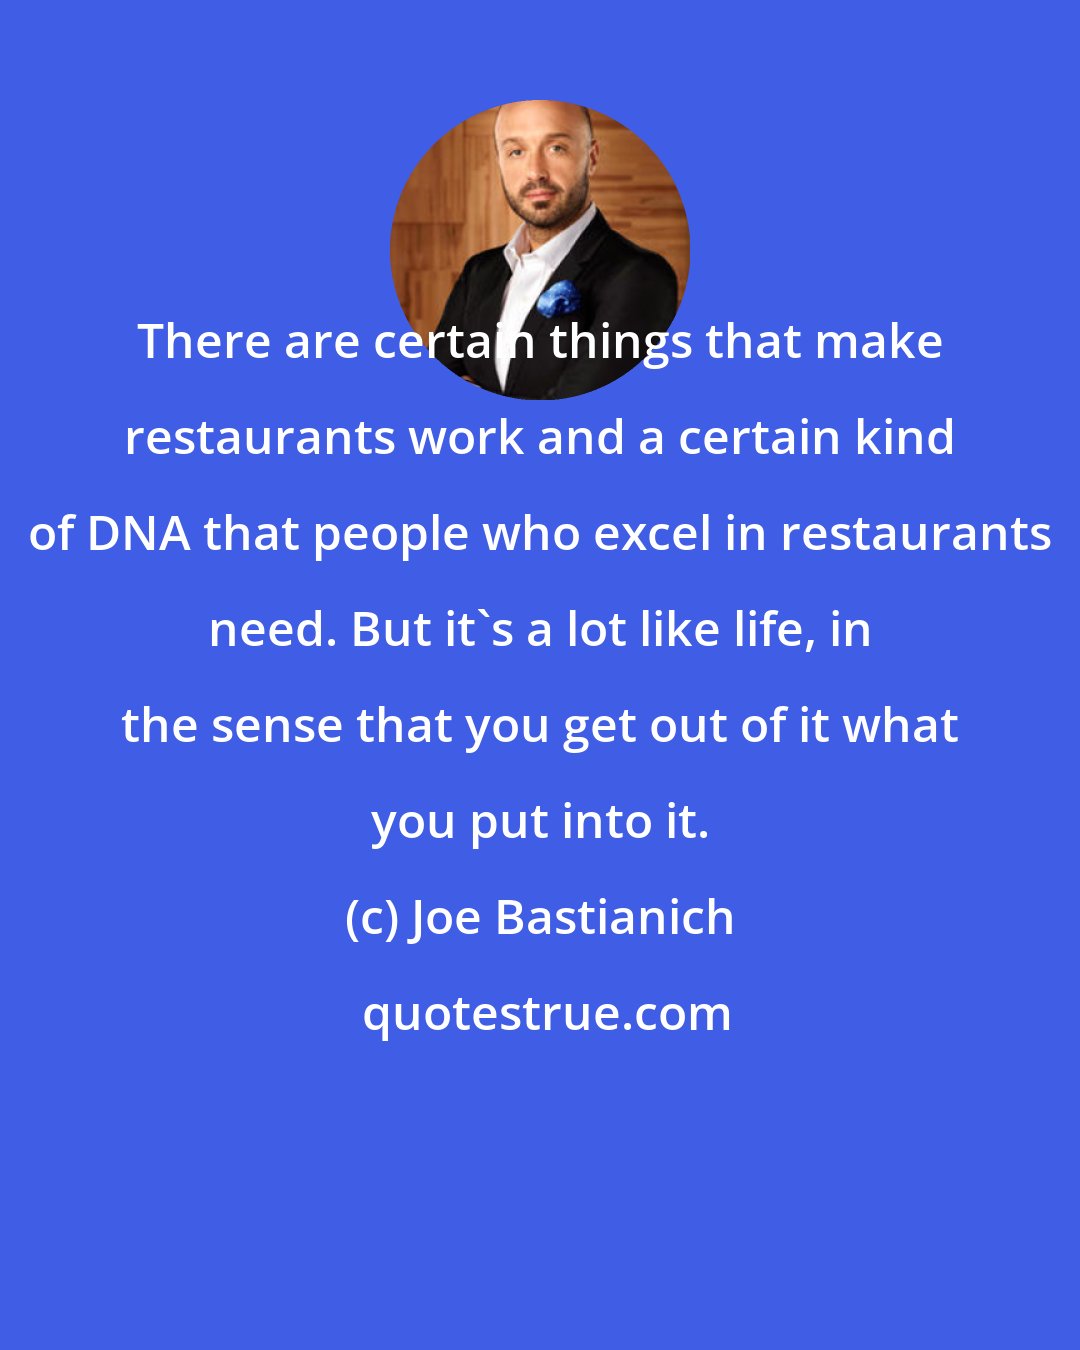 Joe Bastianich: There are certain things that make restaurants work and a certain kind of DNA that people who excel in restaurants need. But it's a lot like life, in the sense that you get out of it what you put into it.